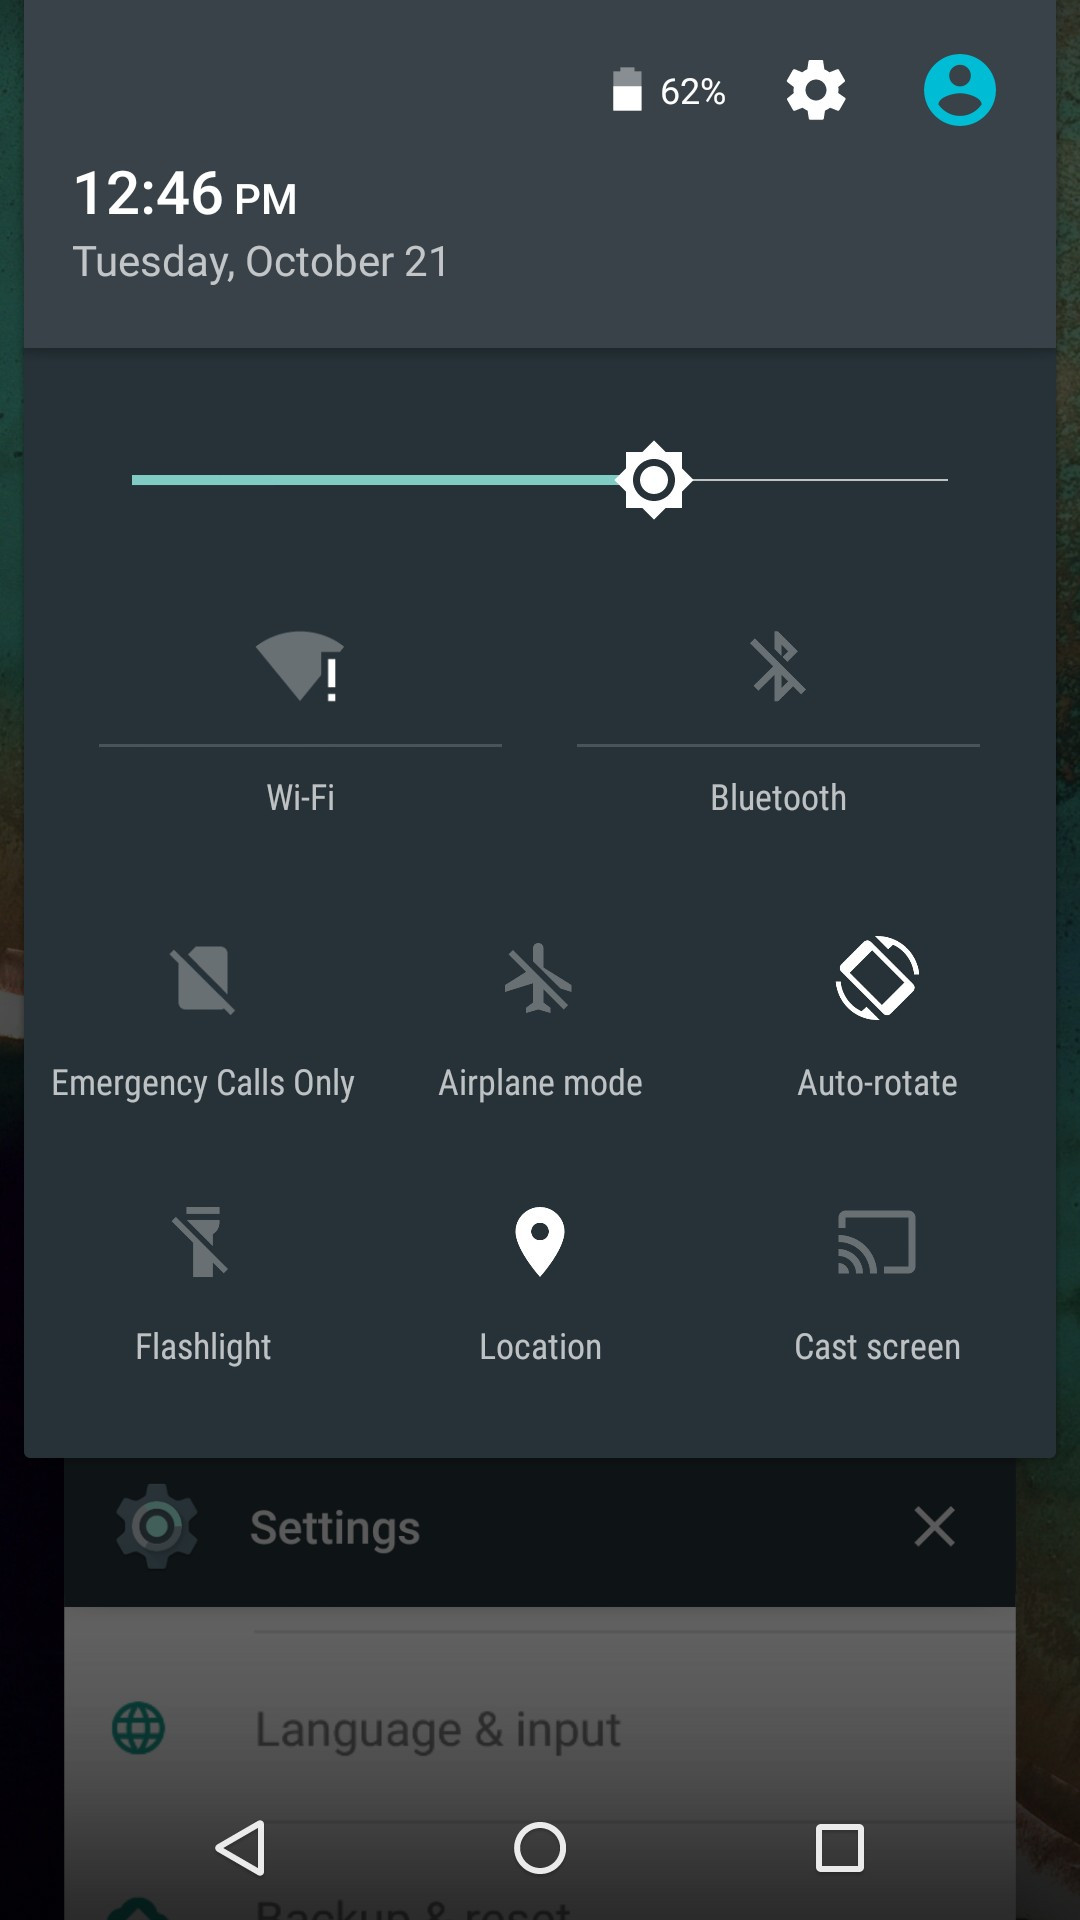 1413890171_new-toggles-in-the-pull-down-connectivity-menu-screen-cast-flashlight.jpg